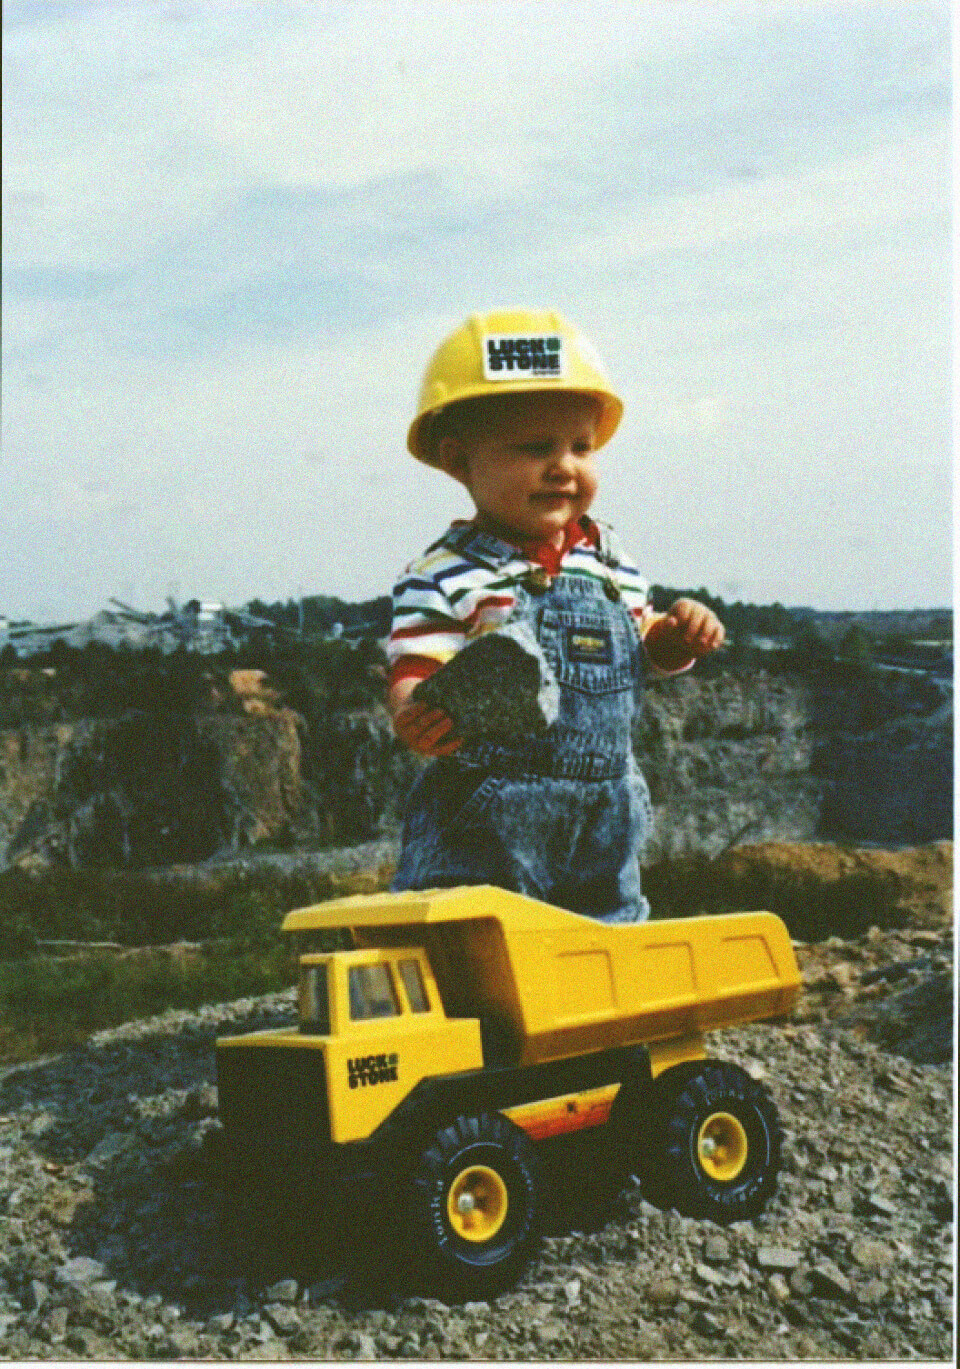 Richard Luck with toy haul truck at Rockville quarry